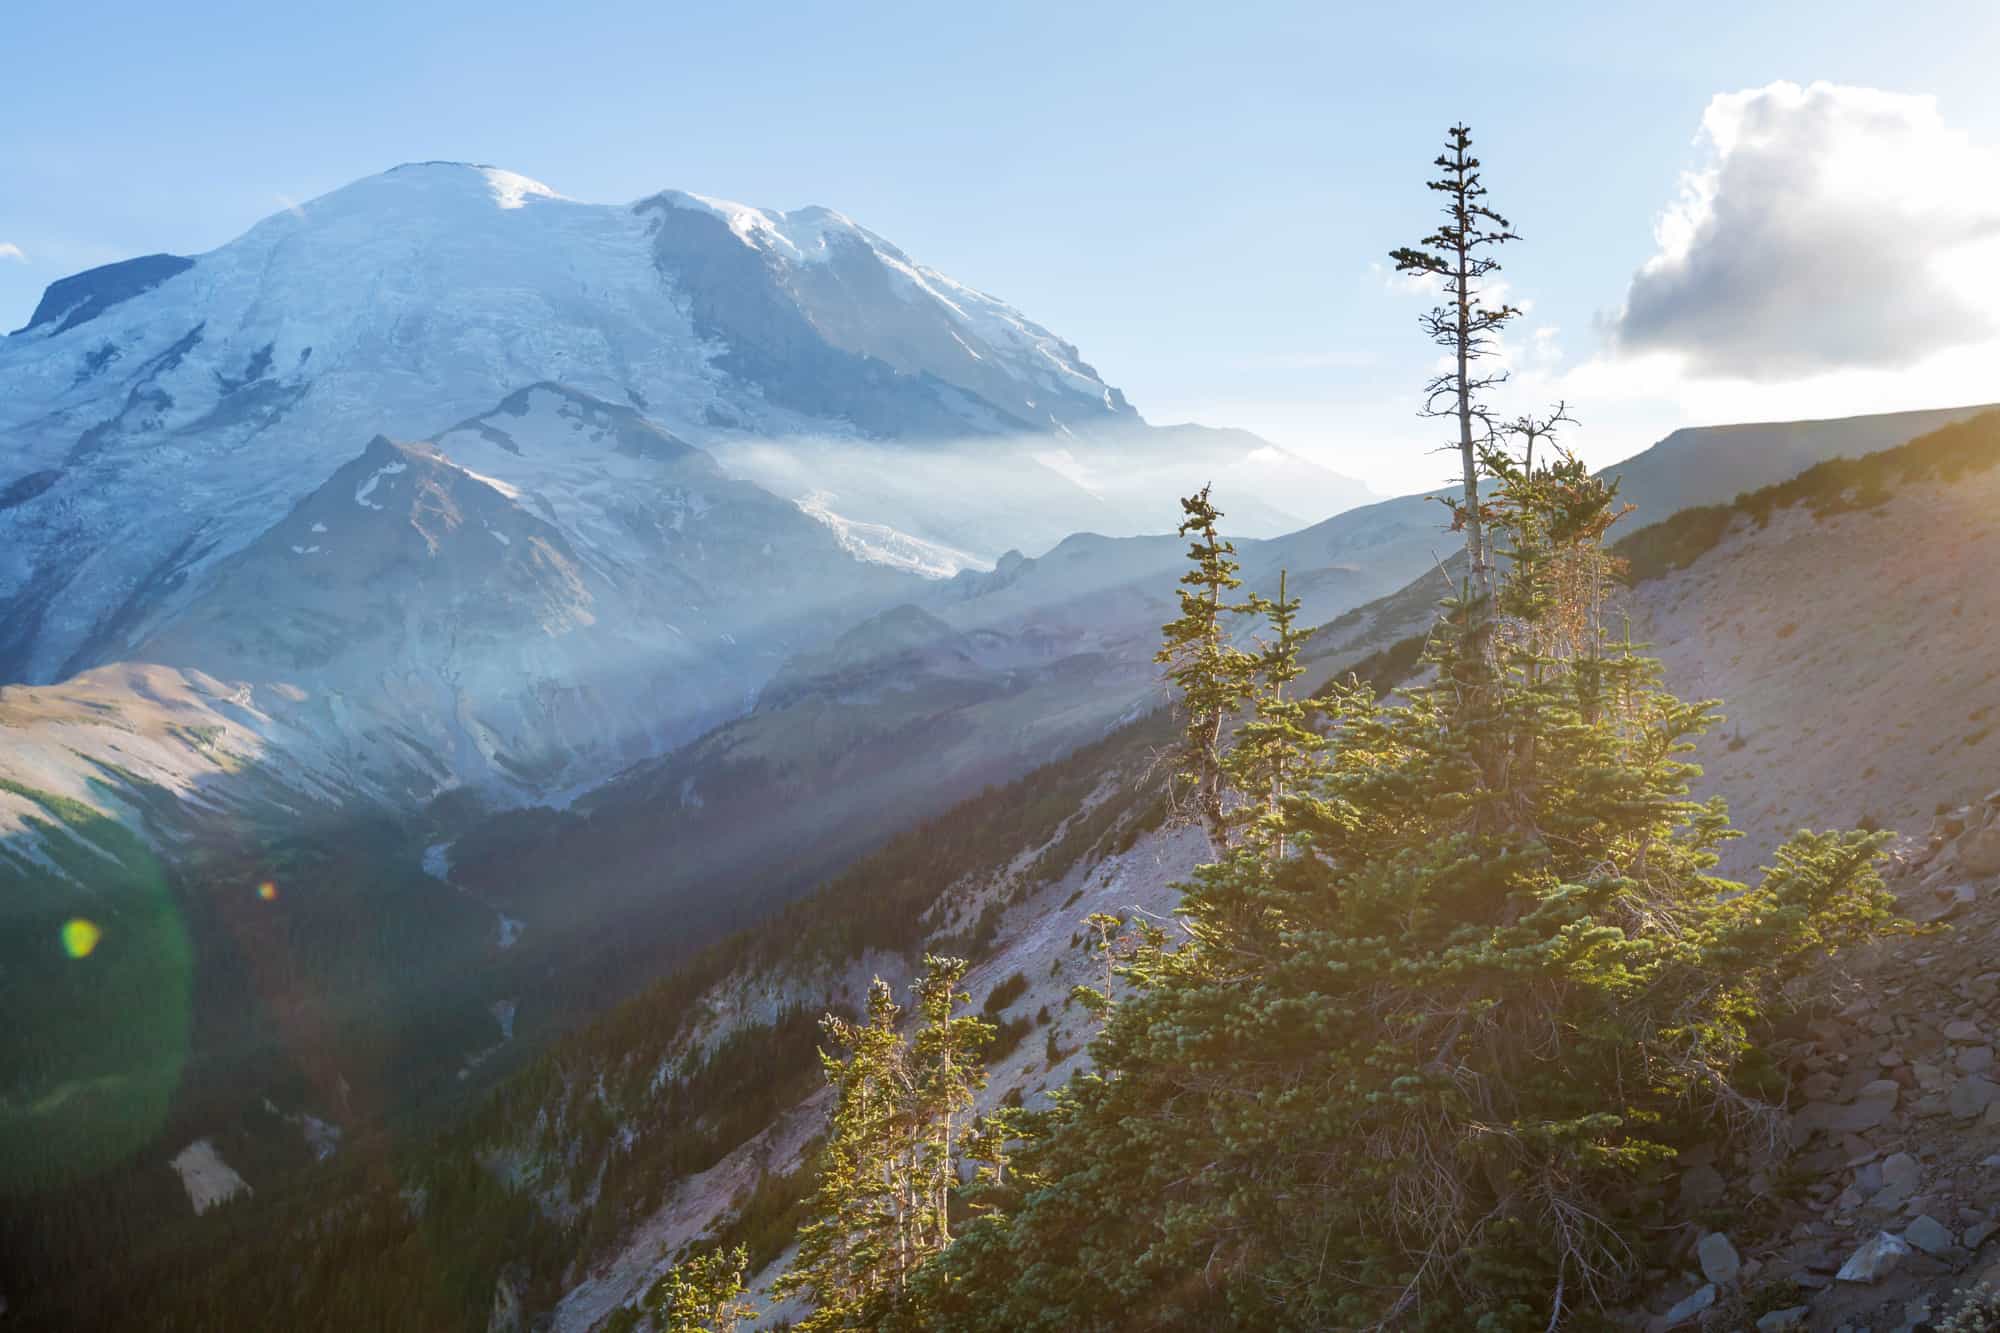 a close up of mount rainier from high within the park, the sunlight from the right is creating sunbeams across the image, hopefully the mountain will be visible if you take one of the mount rainier tours from seattle